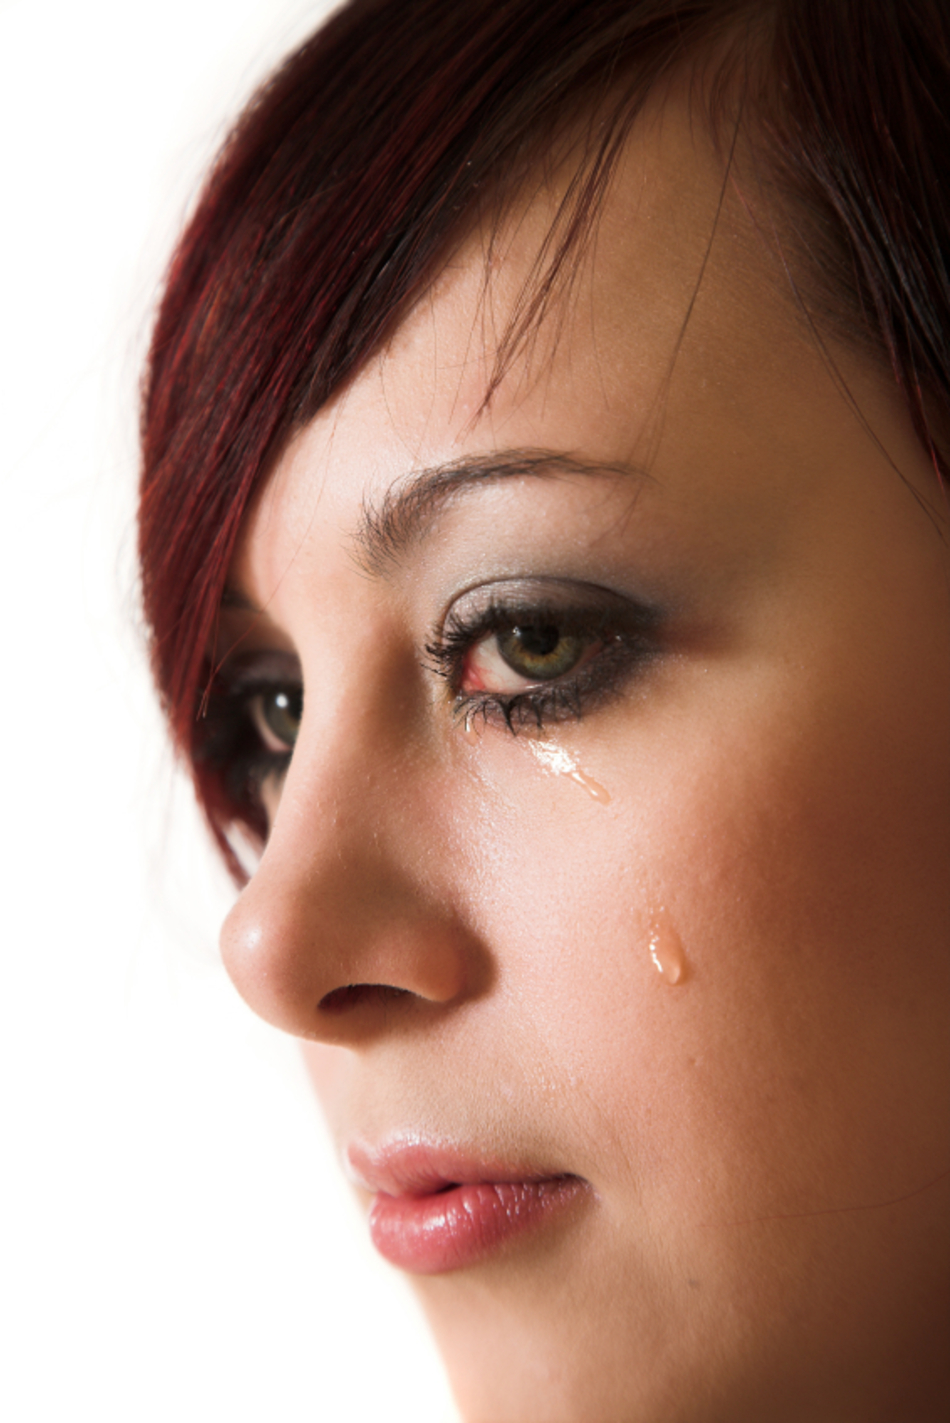 What It Might Mean If You're Crying For No Reason